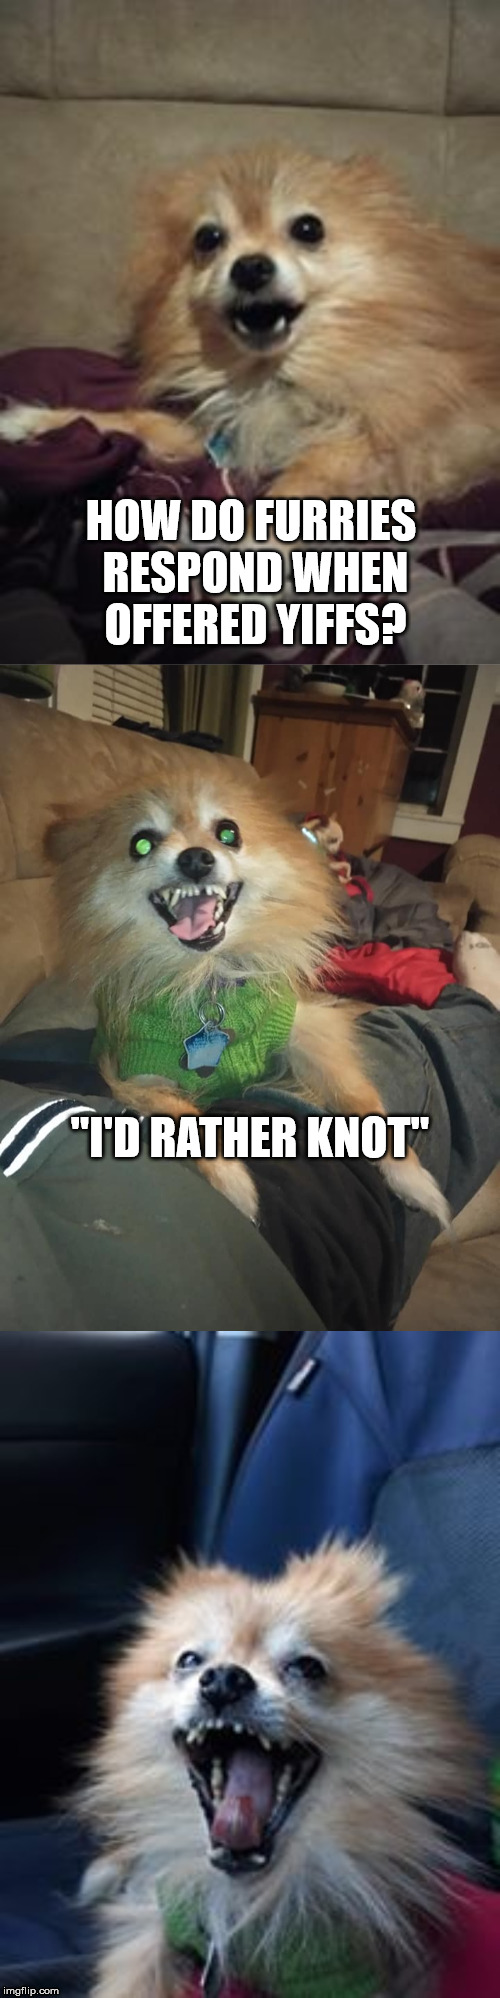 Bad Pun Mocha | HOW DO FURRIES RESPOND WHEN OFFERED YIFFS? "I'D RATHER KNOT" | image tagged in bad pun mocha | made w/ Imgflip meme maker